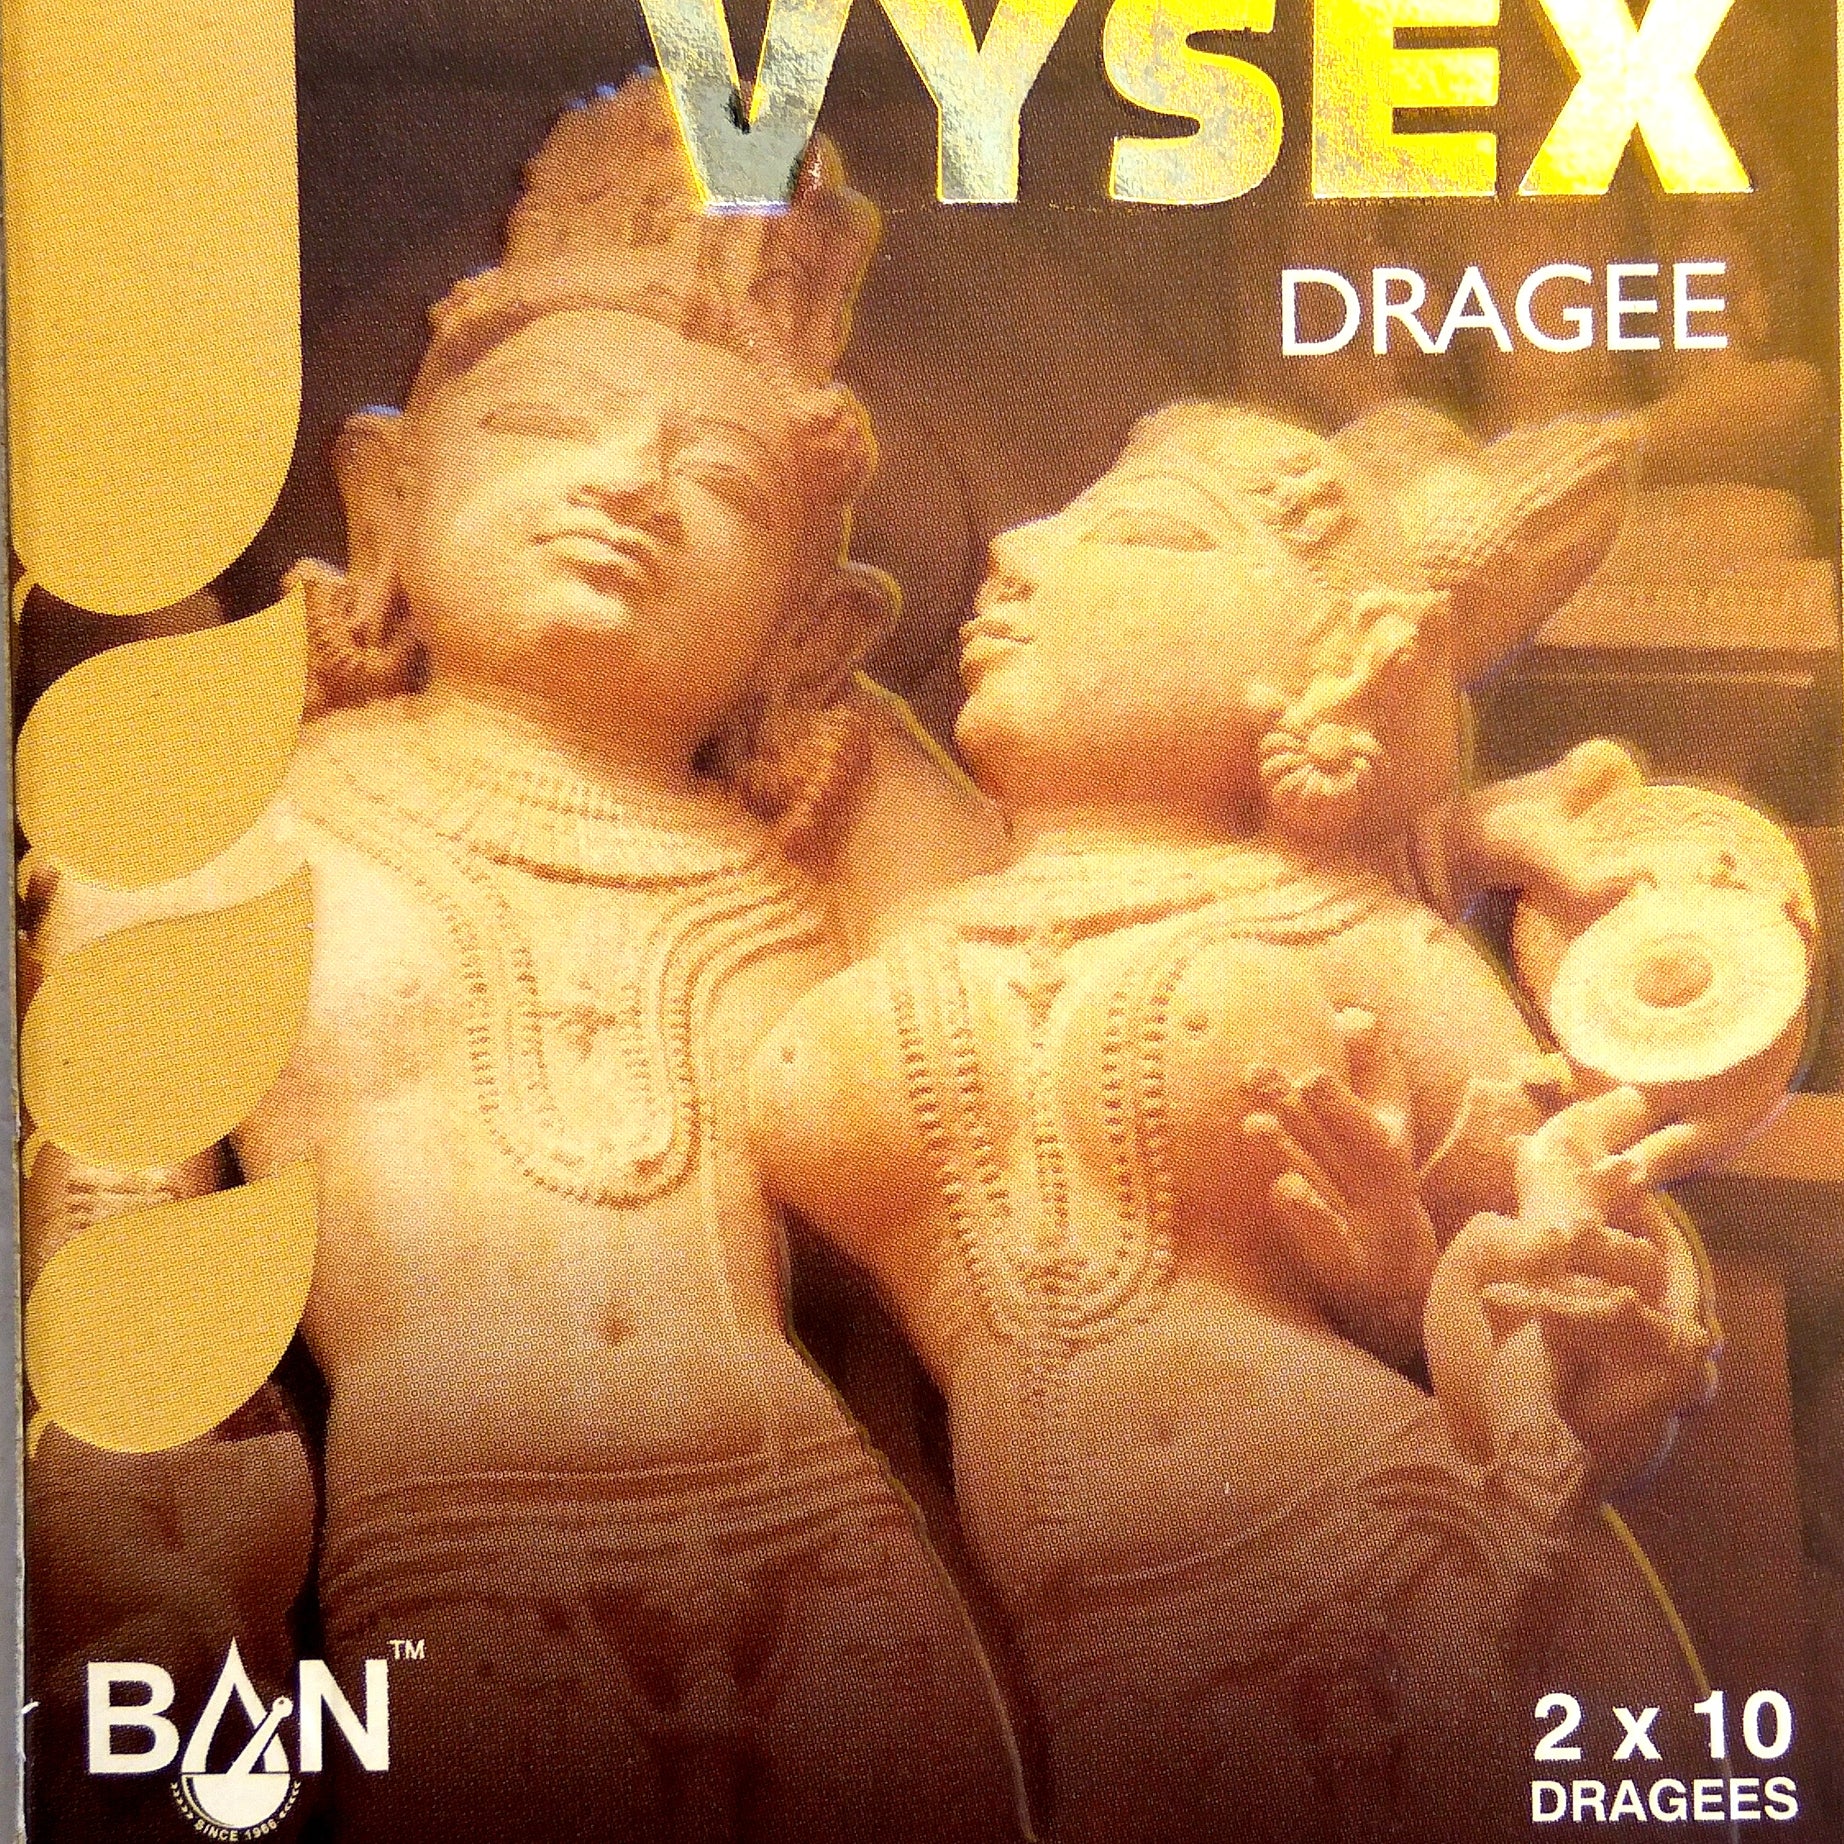 Shop Vysex Tablets 10Tablets at price 77.50 from Banlabs Online - Ayush Care